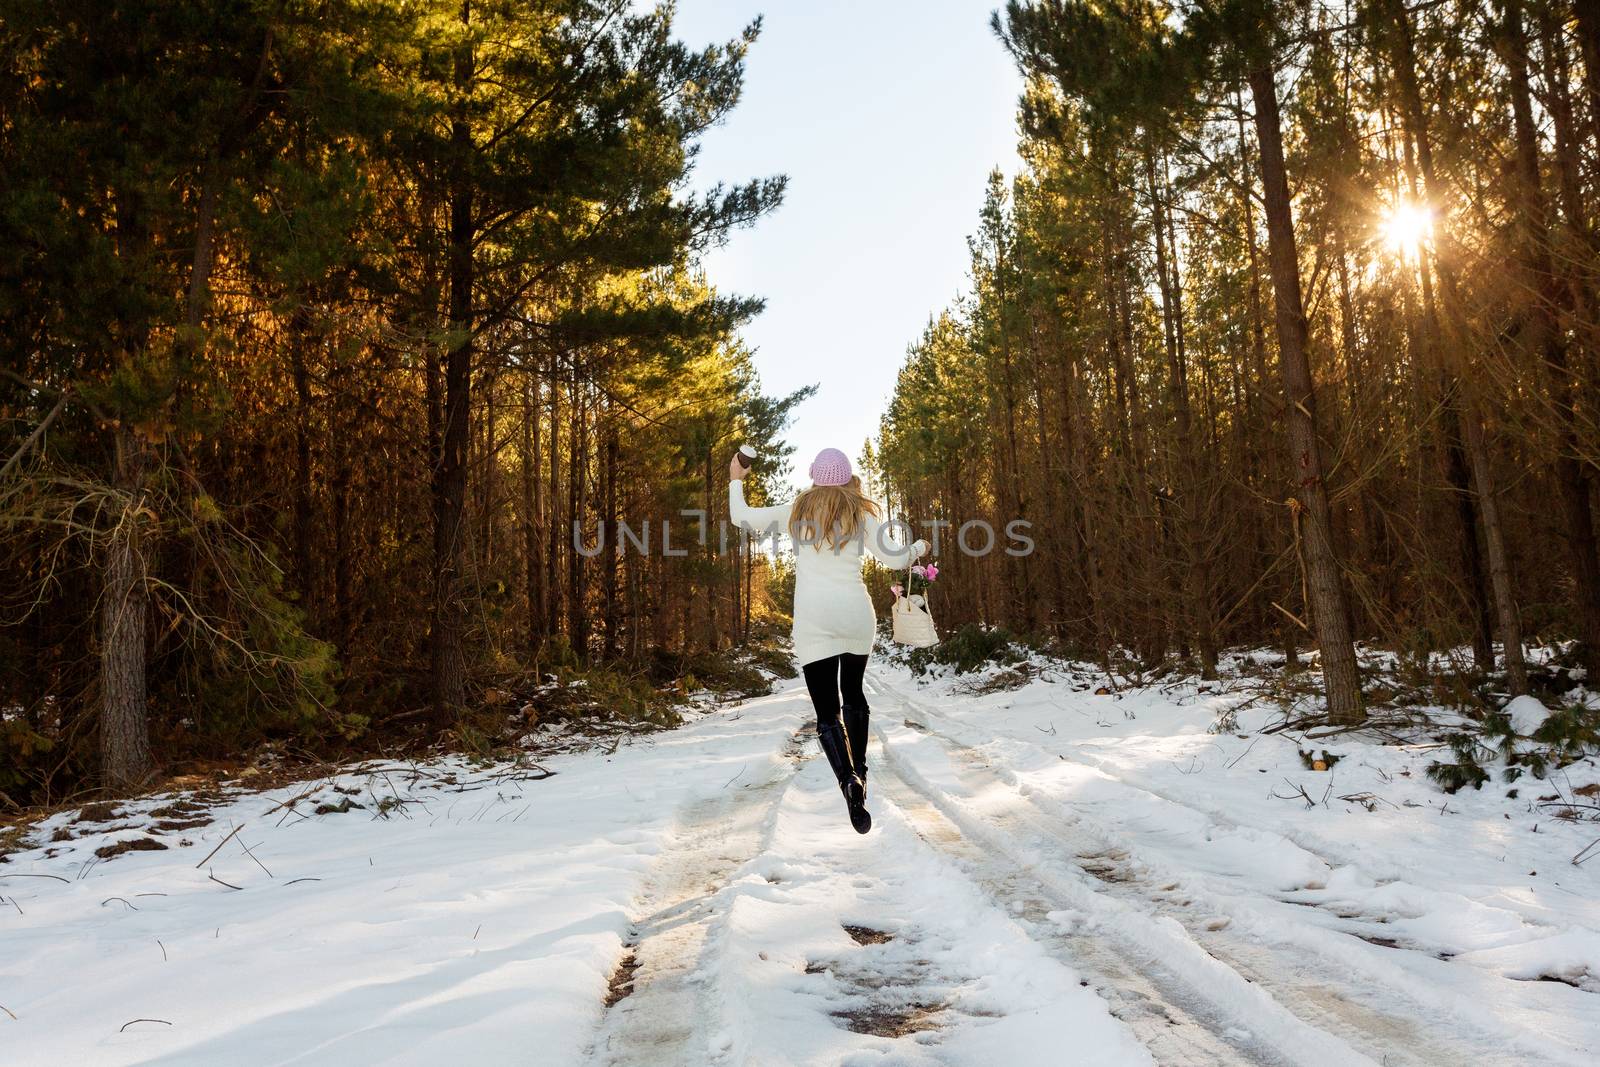 A happy energetic woman frolicks in the snow among the forest trees